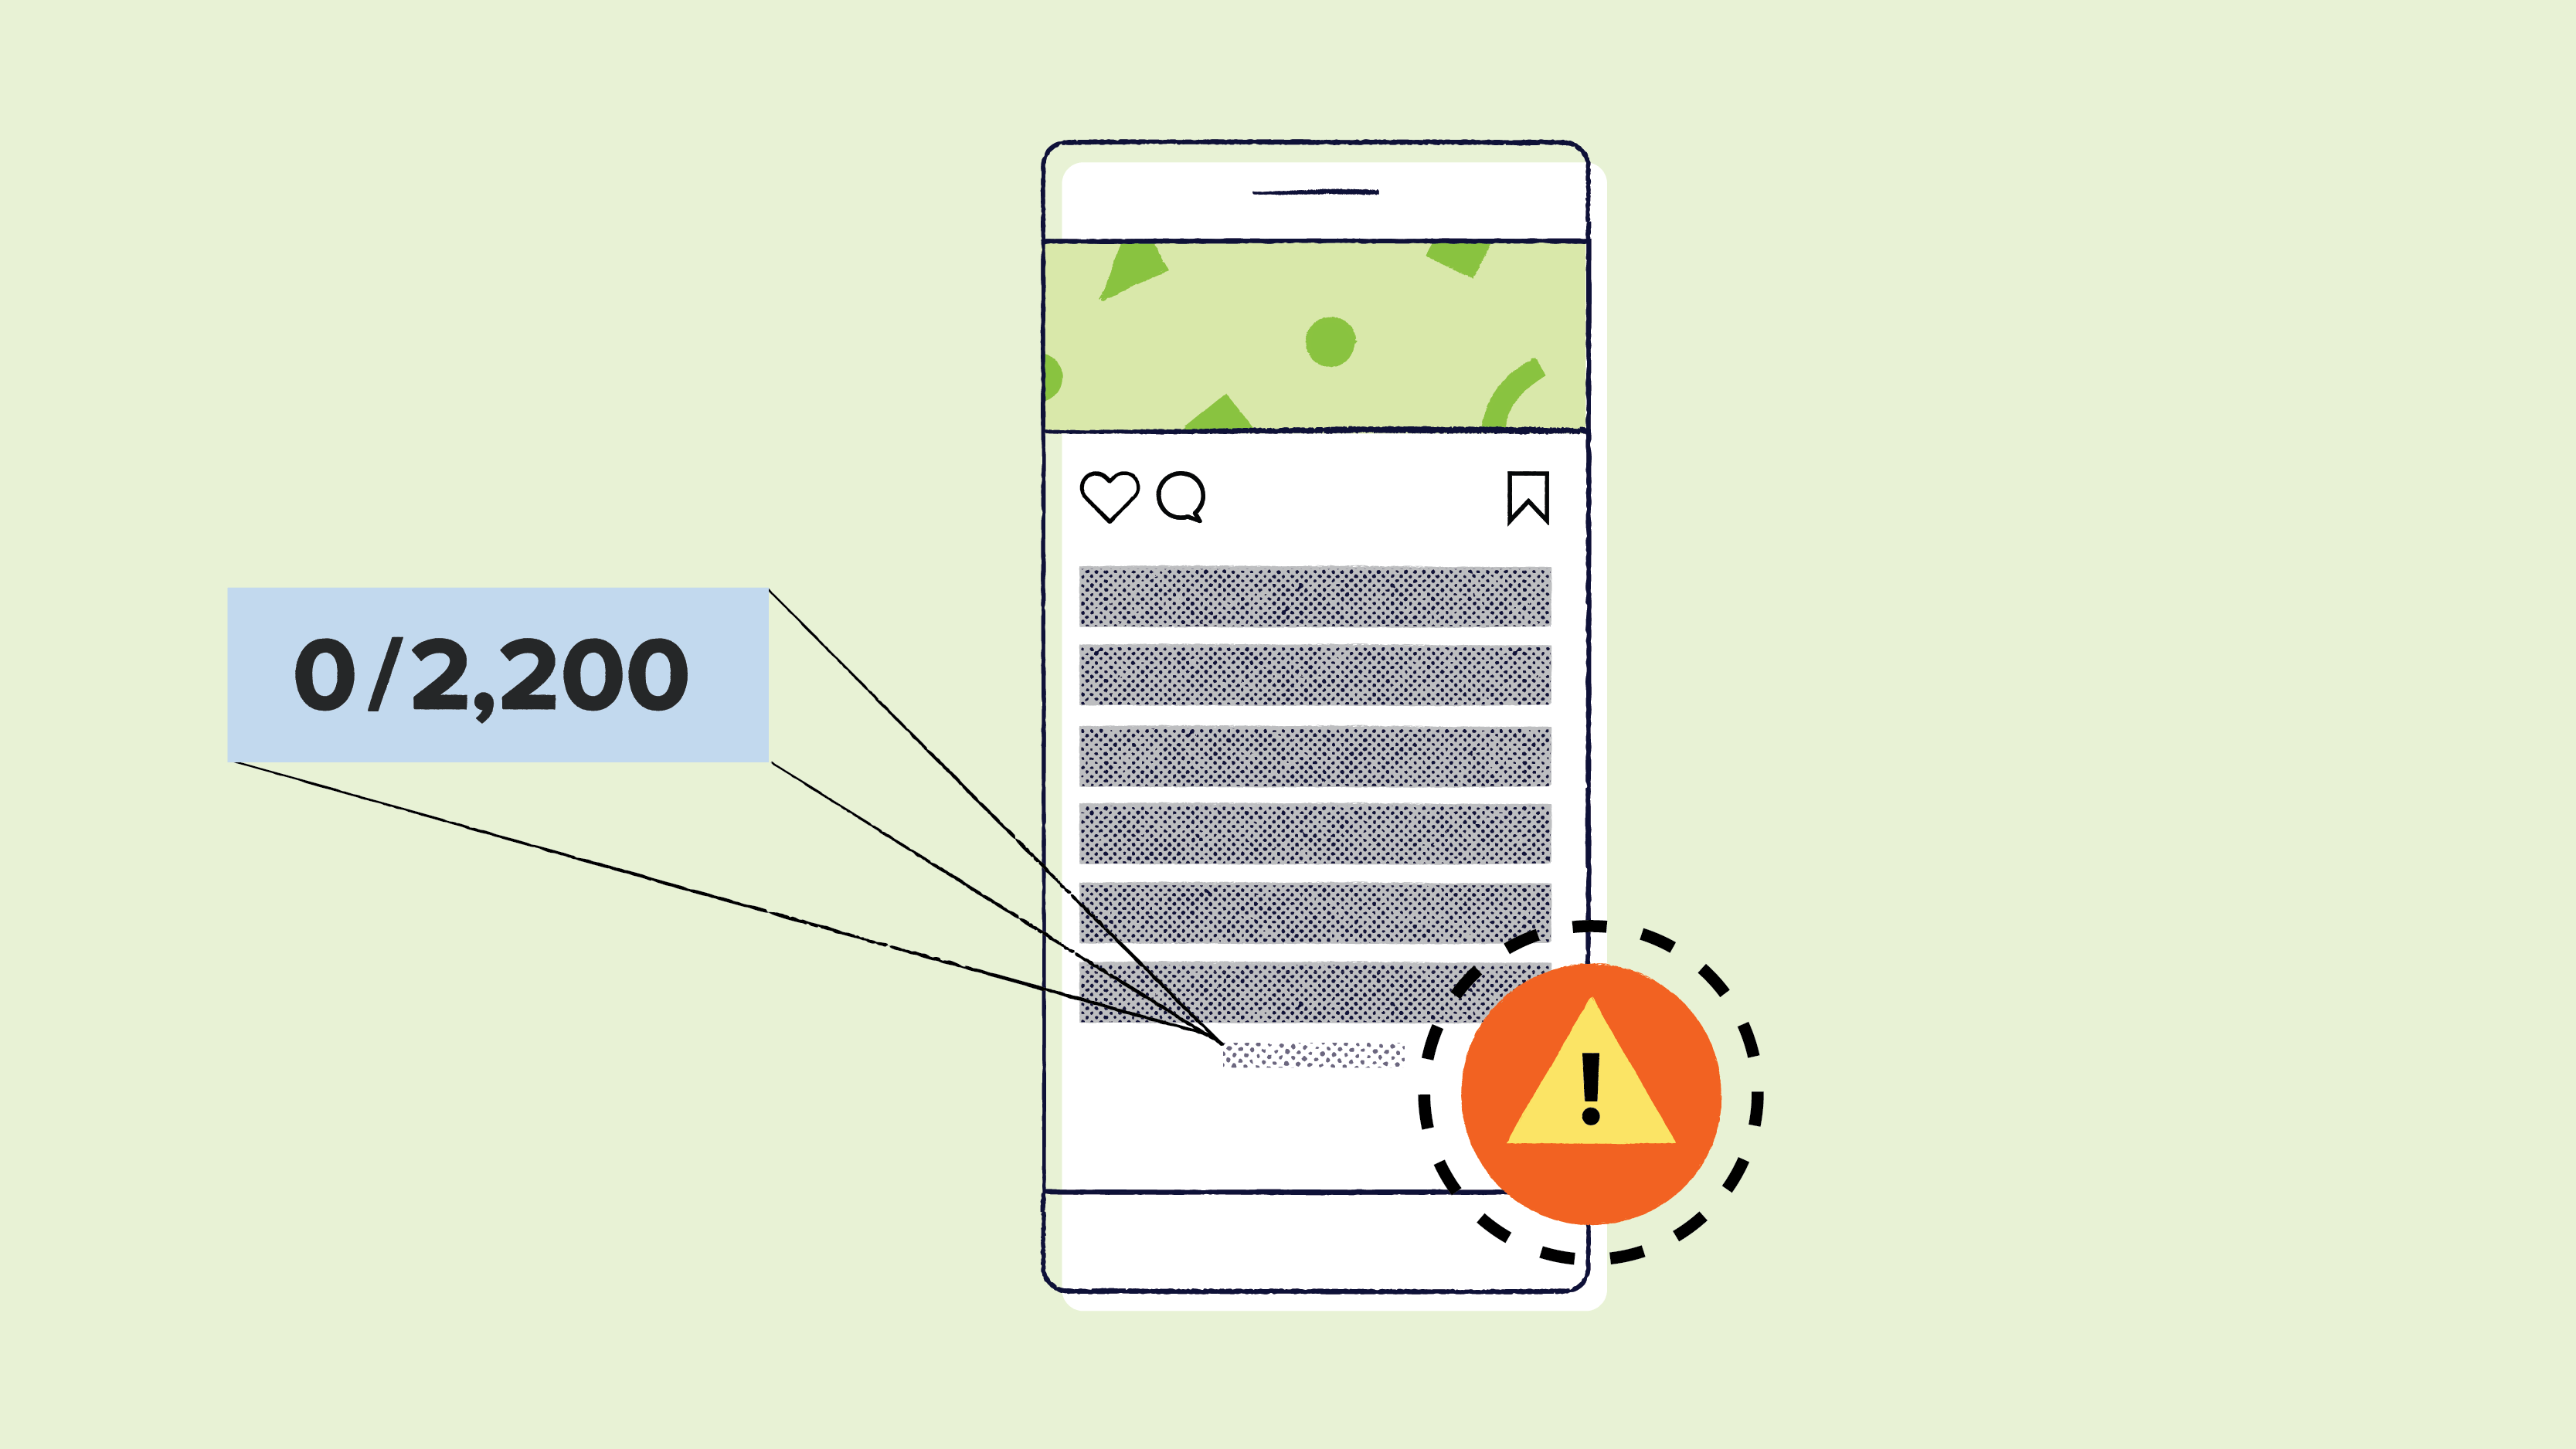 Illustration of Instagram on a mobile device showing 2,200 character limit and warning icon